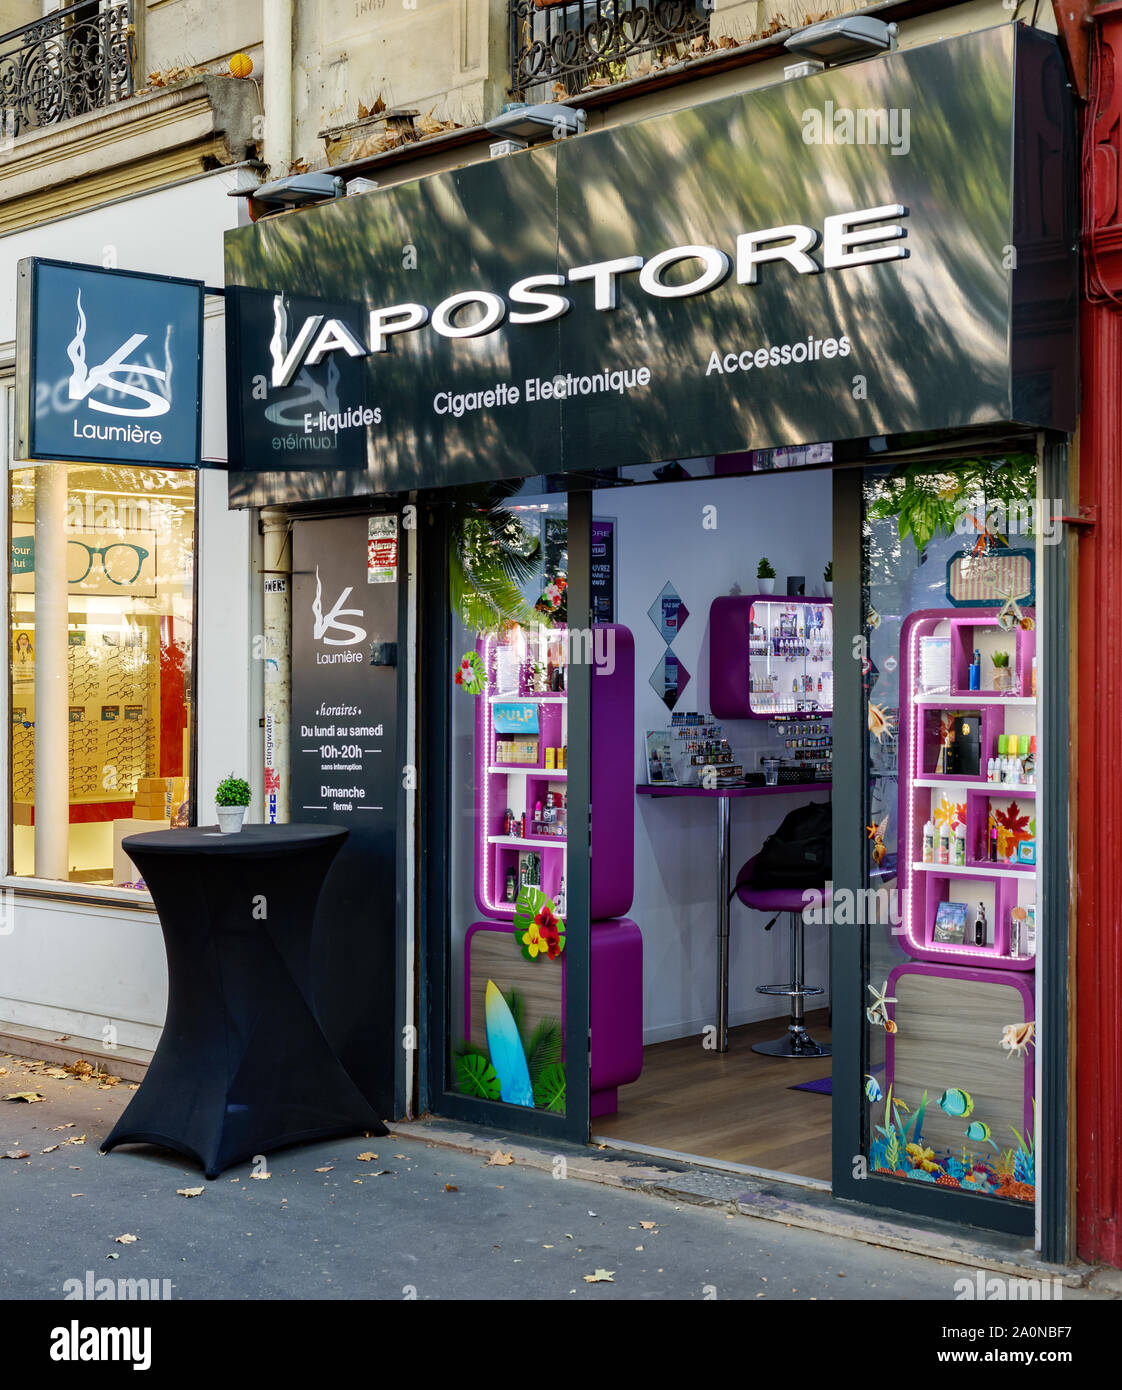 PARIS, FRANCE - SEPTEMBER 20, 2019: E-cigarettes store still open in a parisian street while more and more states are banning these products. Stock Photo